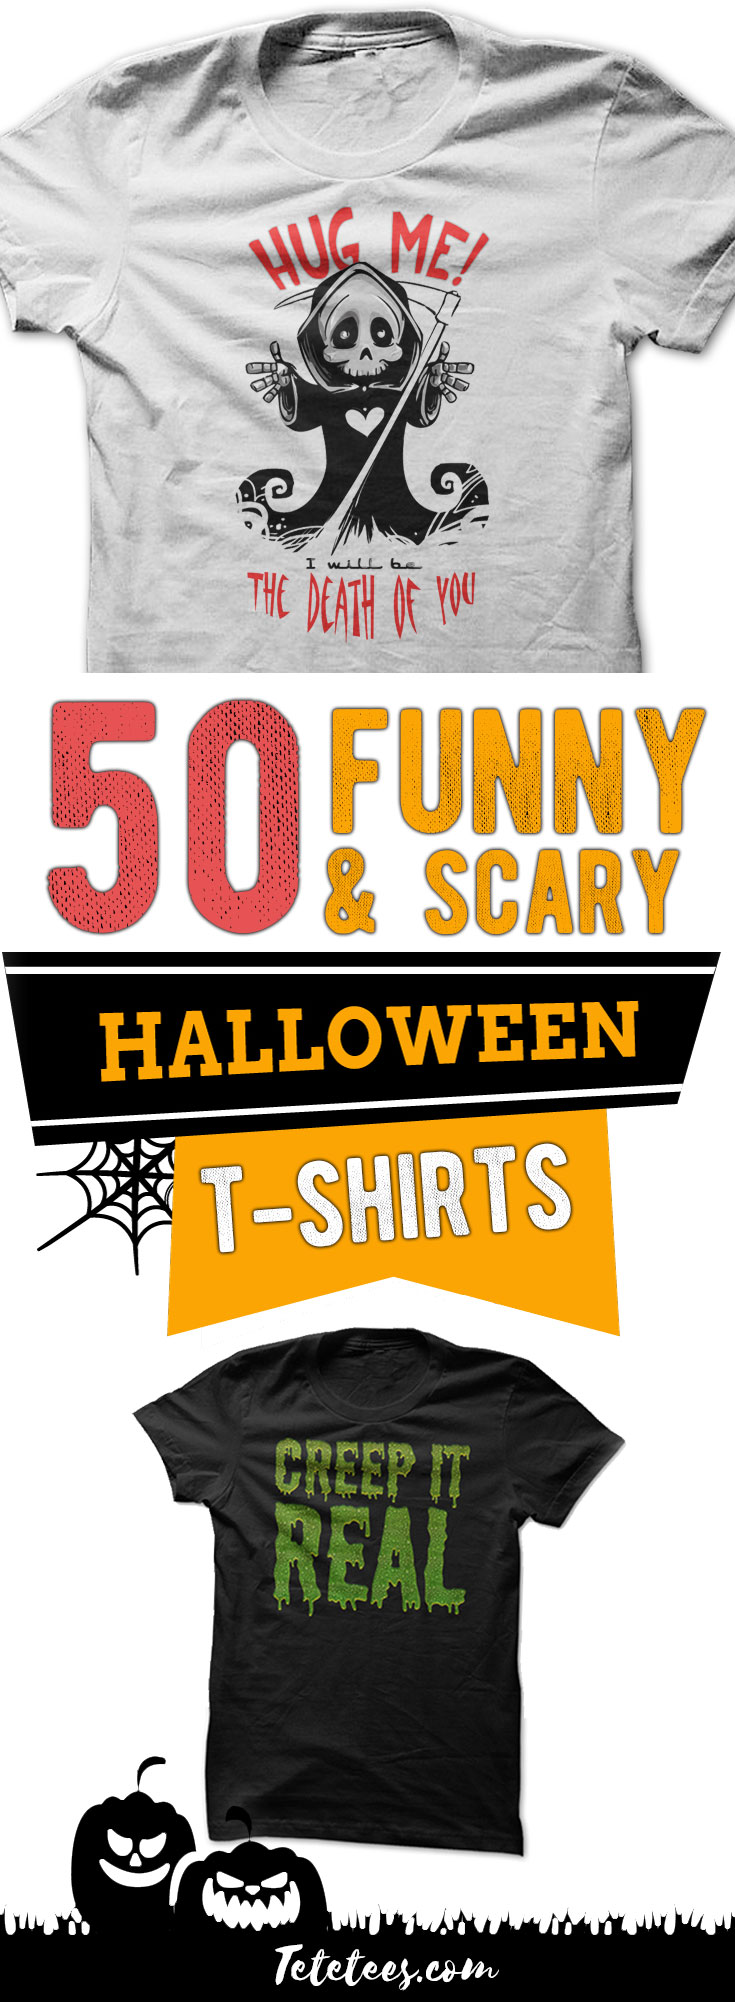 50 Funny & Scary Halloween T-Shirts